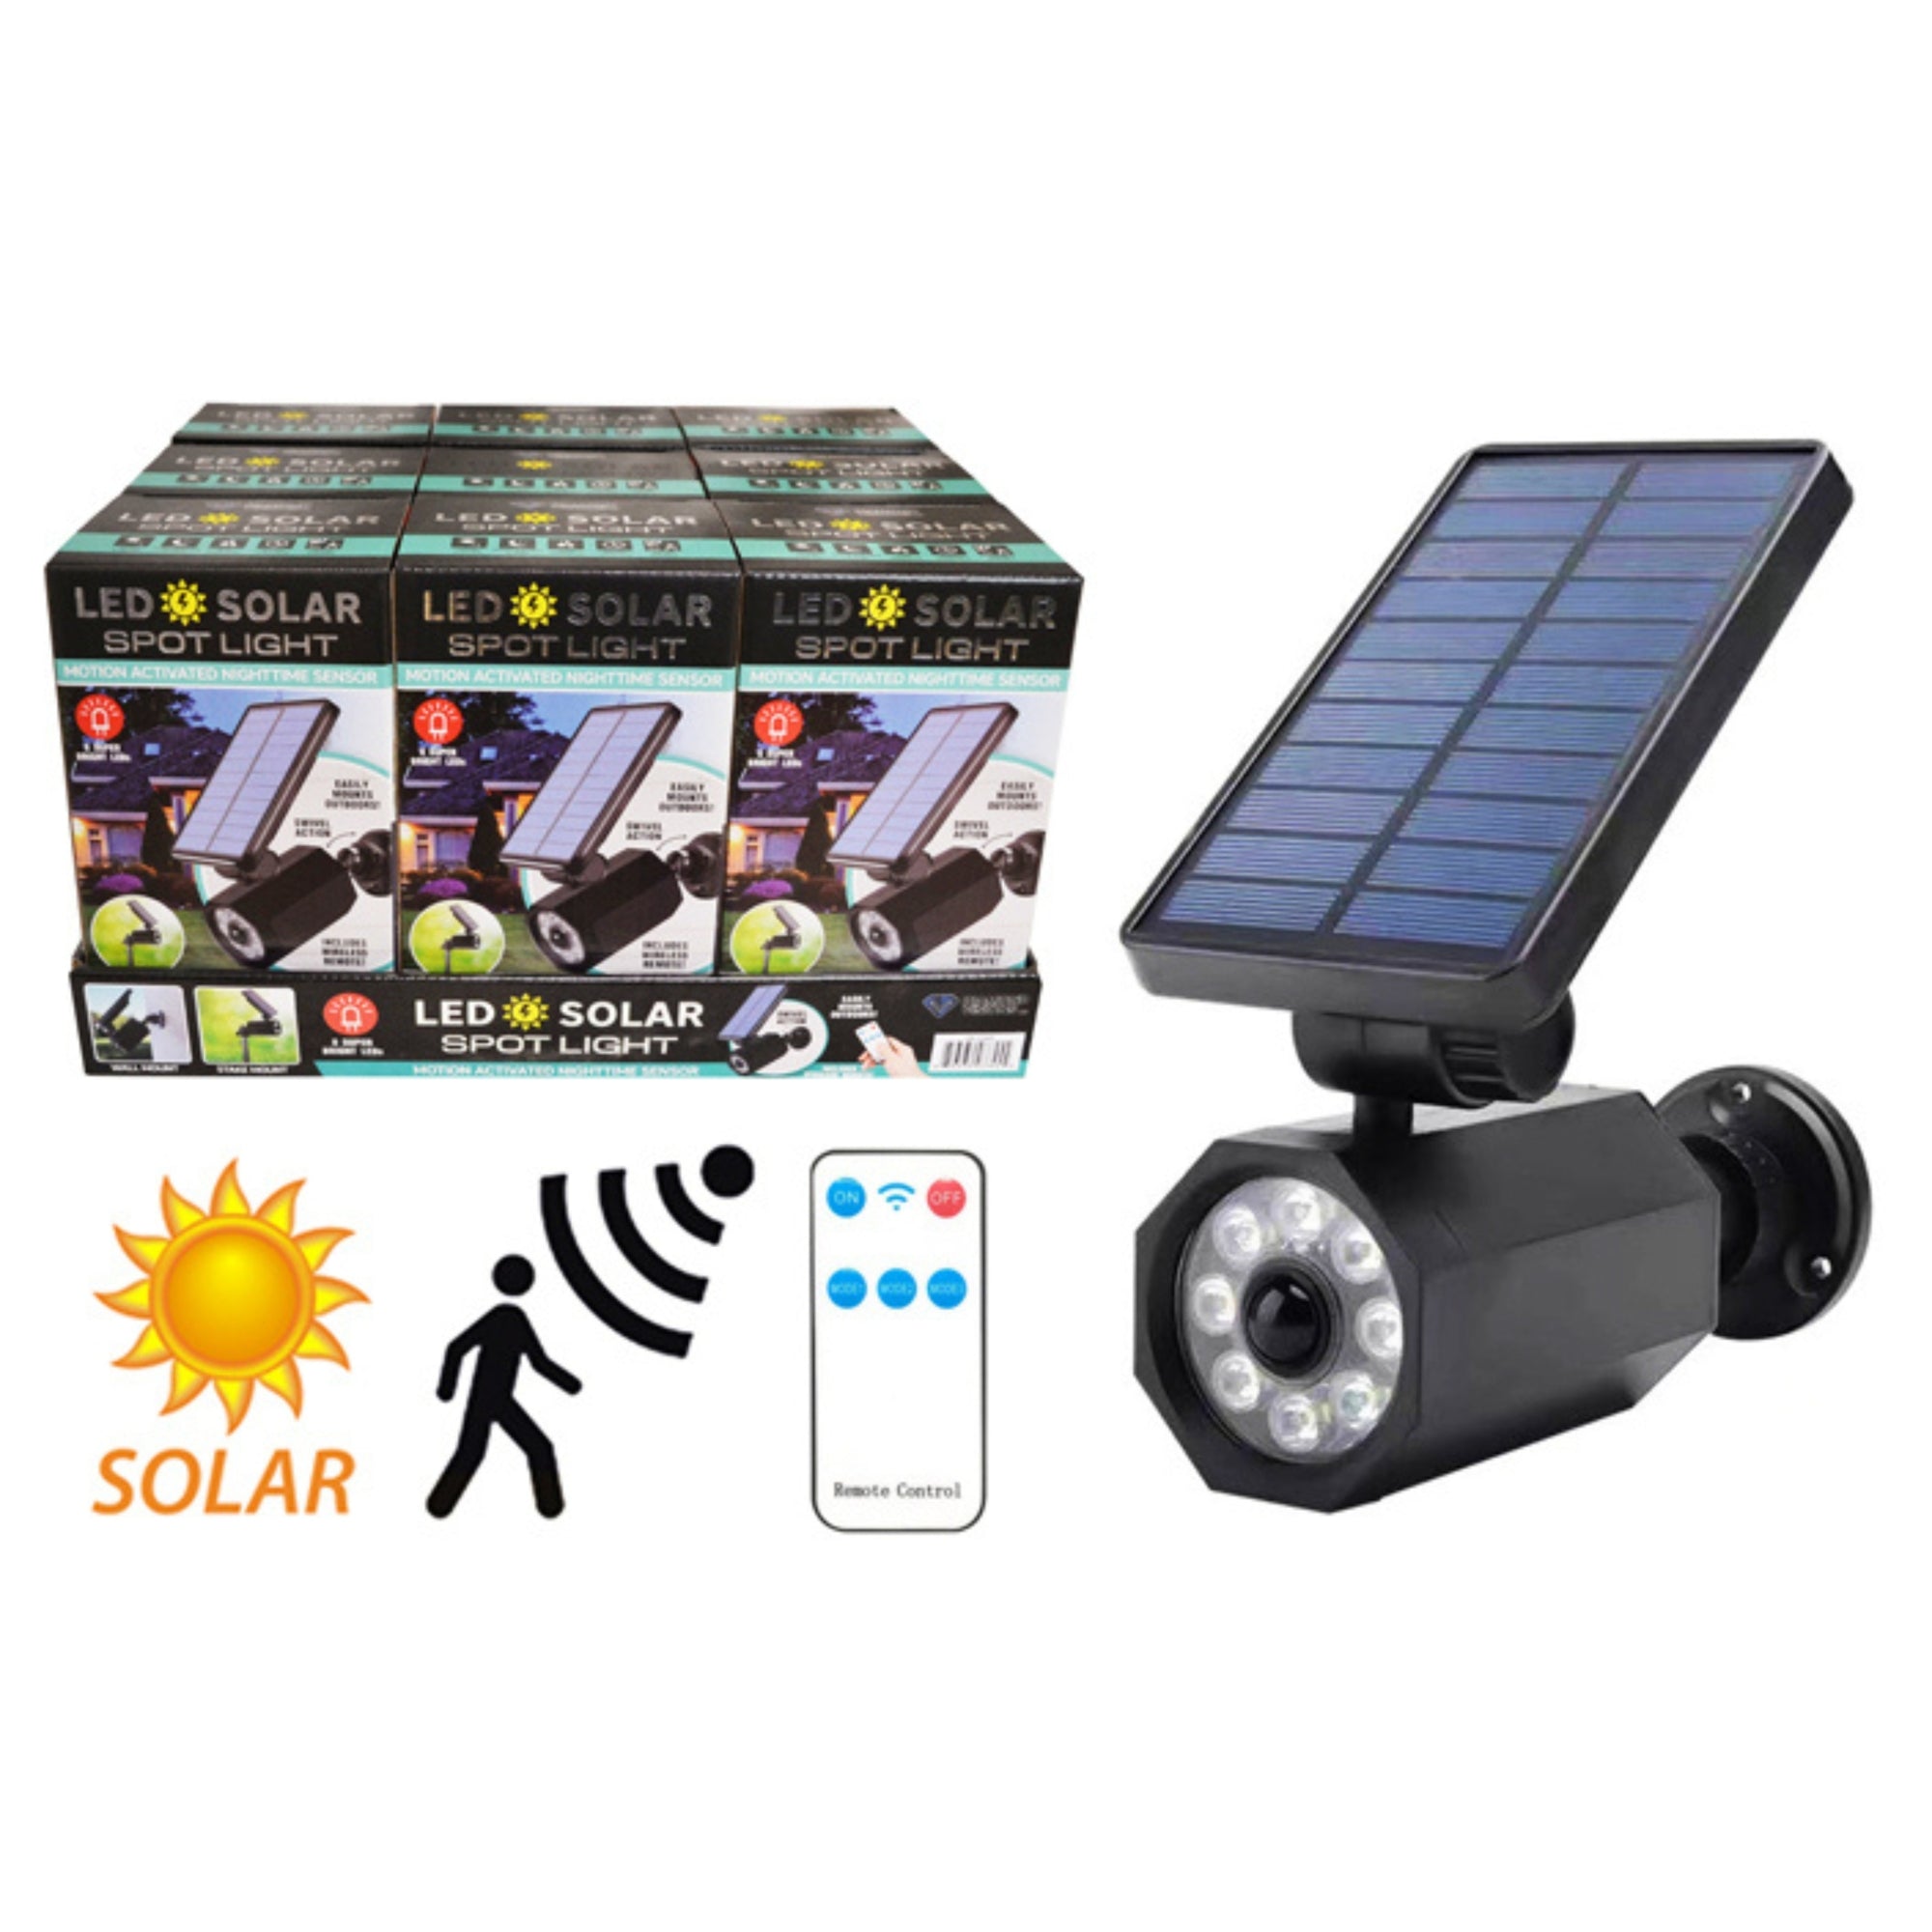 LED Solar Spotlight with Remote